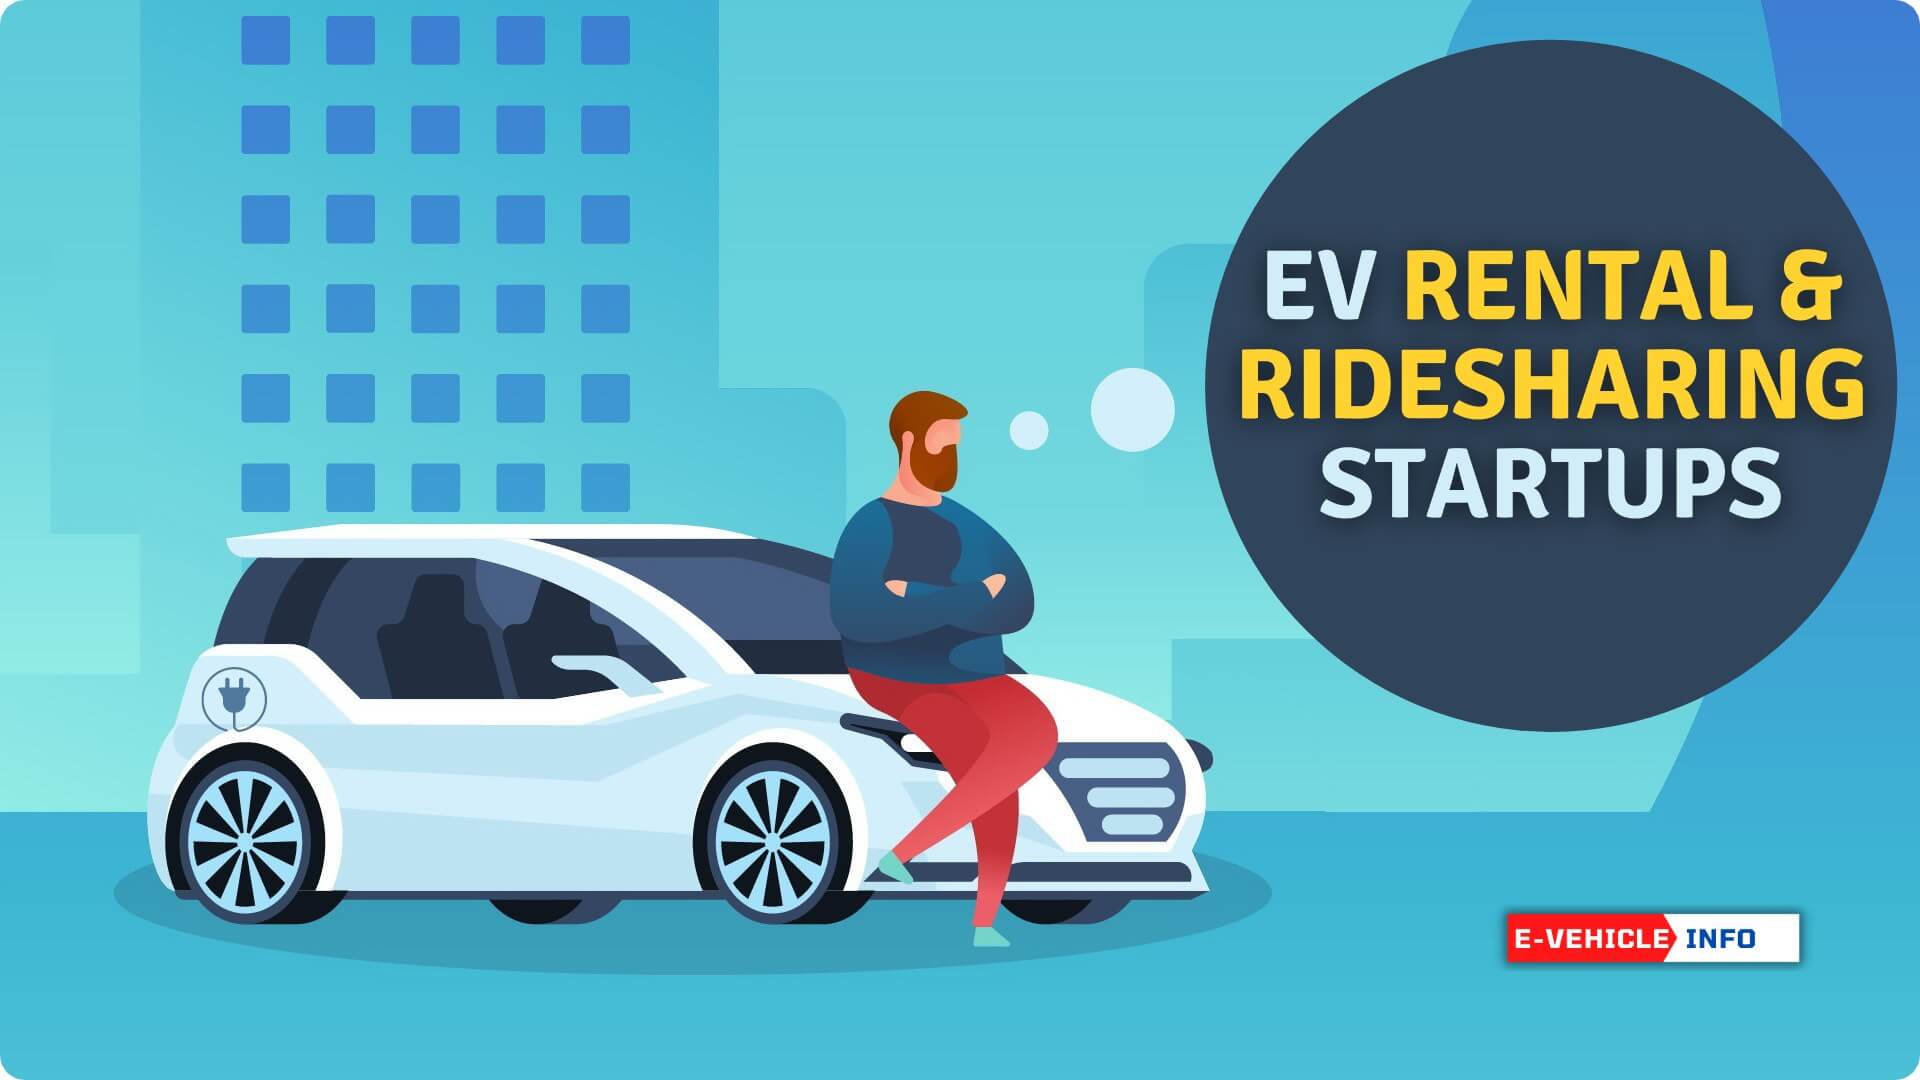 https://e-vehicleinfo.com/electric-vehicle-rental-ridesharing-startups-in-india/